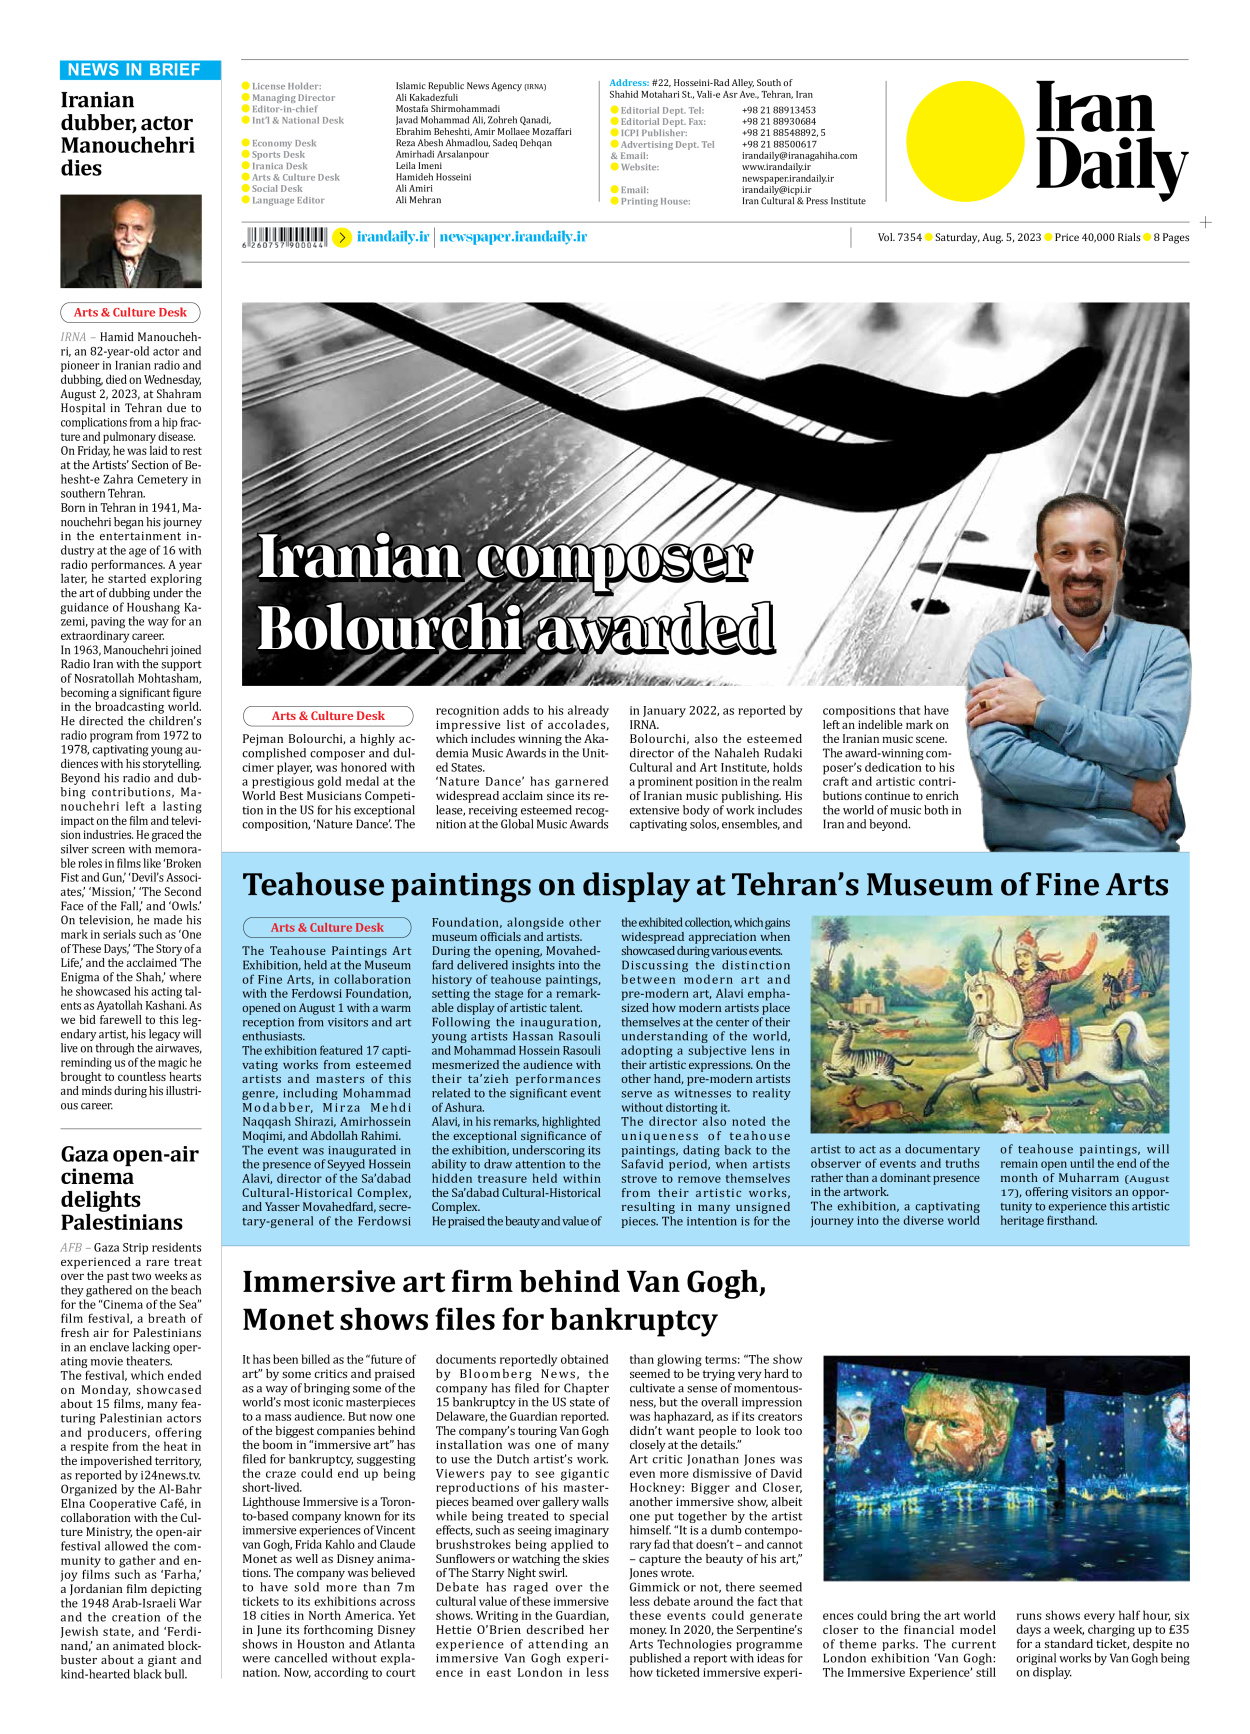 Iran Daily - Number Seven Thousand Three Hundred and Fifty Four - 05 August 2023 - Page 8